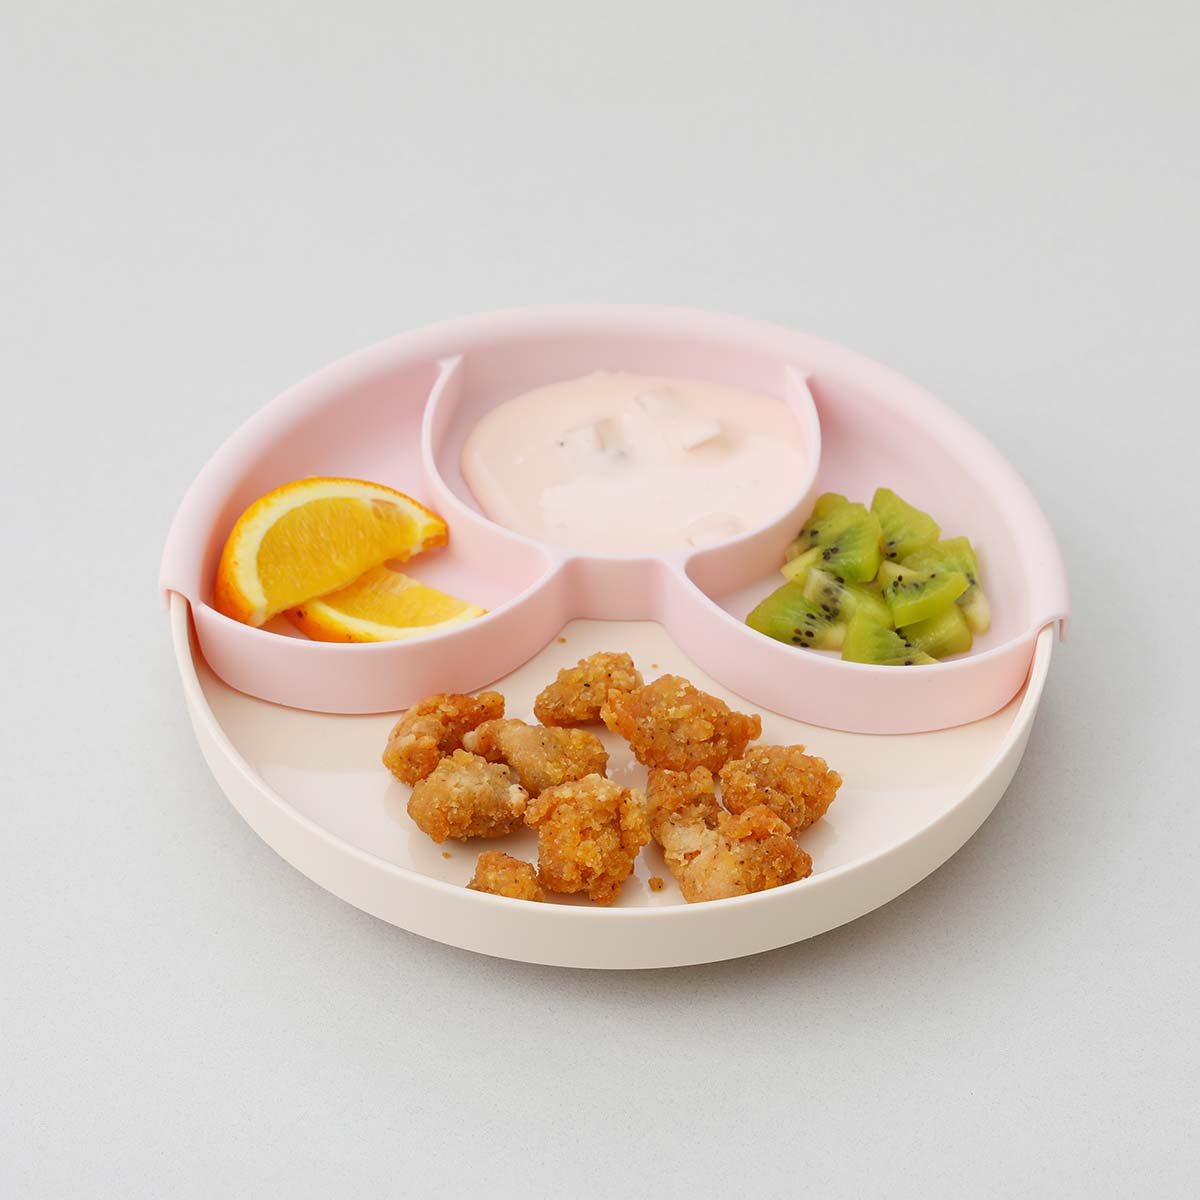 Healthy Meal Set - Divider Plate (Grey/Cotton Candy)